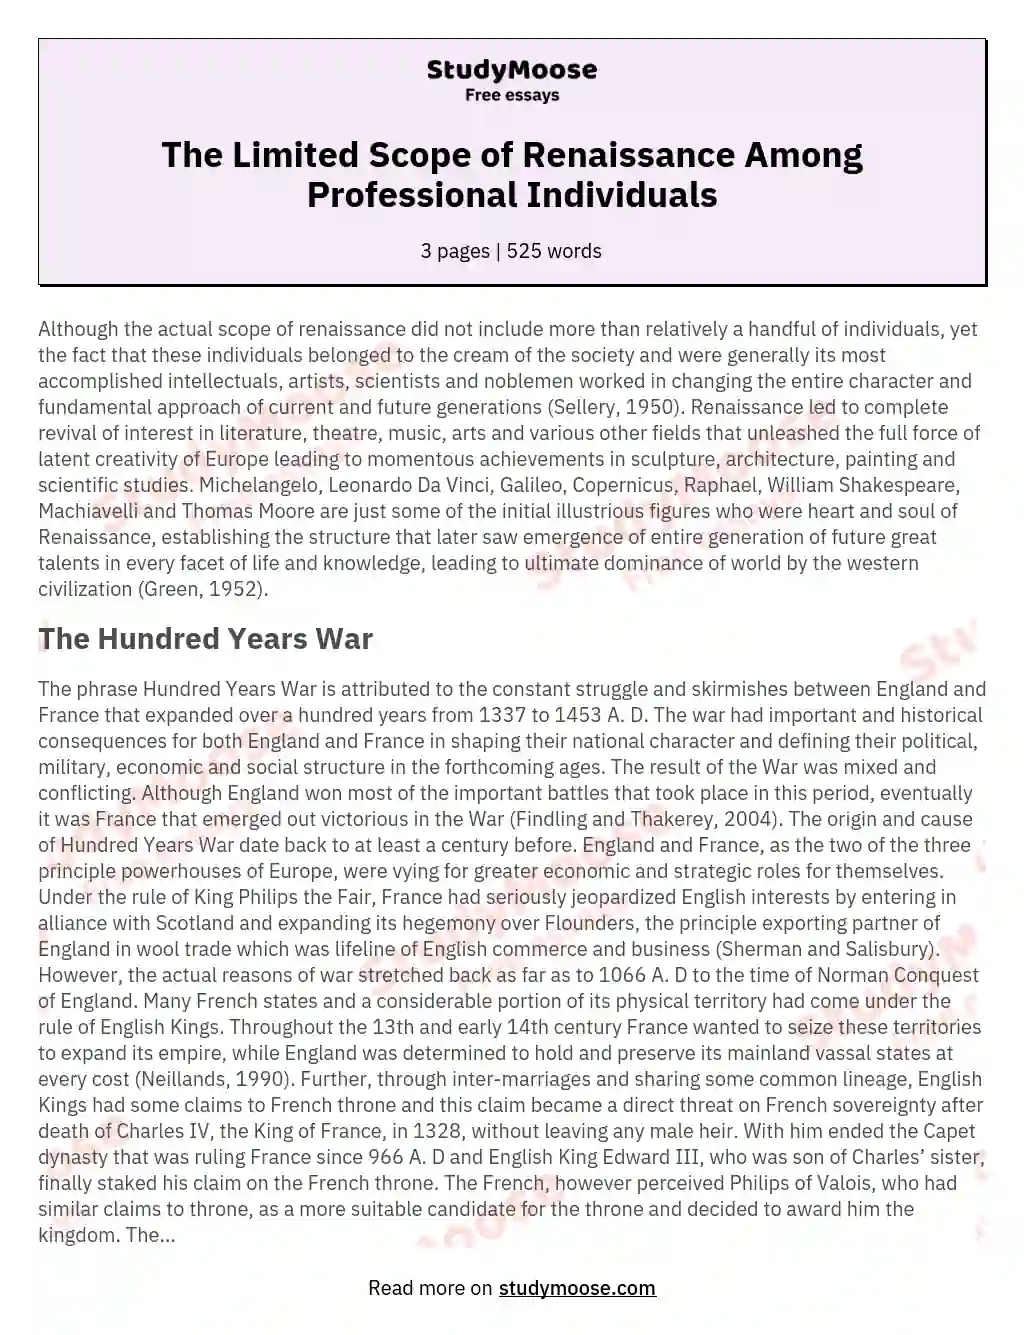 The Limited Scope of Renaissance Among Professional Individuals essay